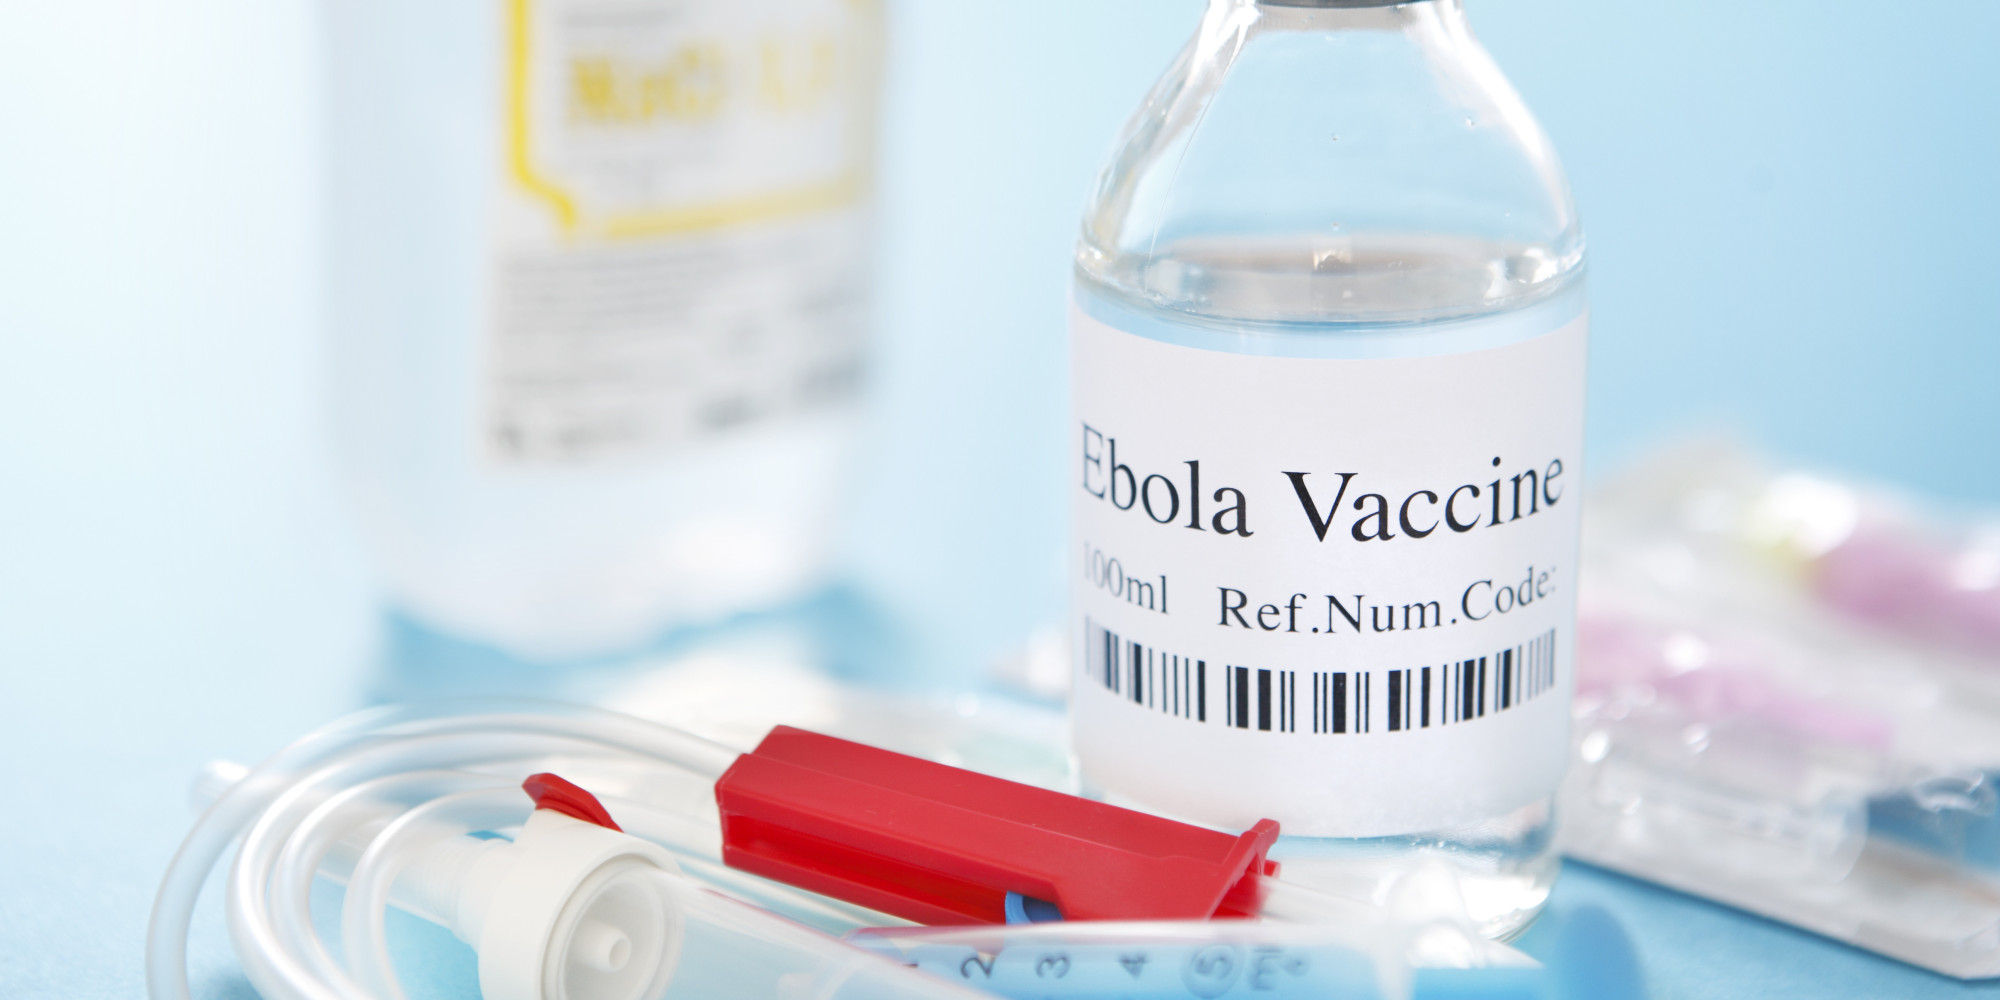 Final trial results confirm Ebola vaccine provides high protection against disease